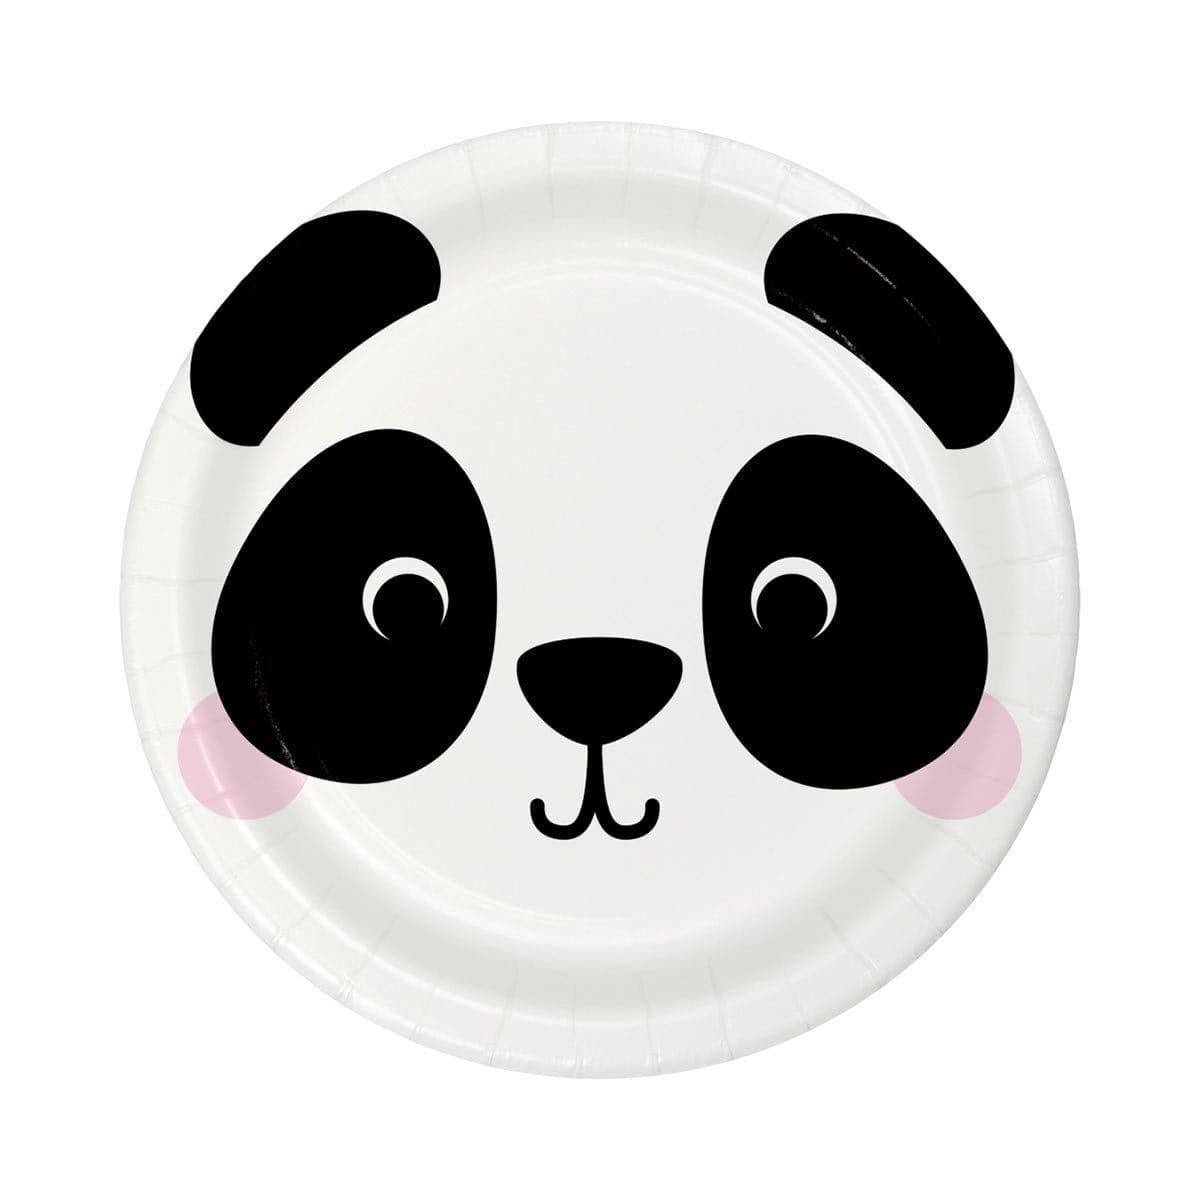 Buy Kids Birthday Panda Plates 7 inches, 8 Count sold at Party Expert